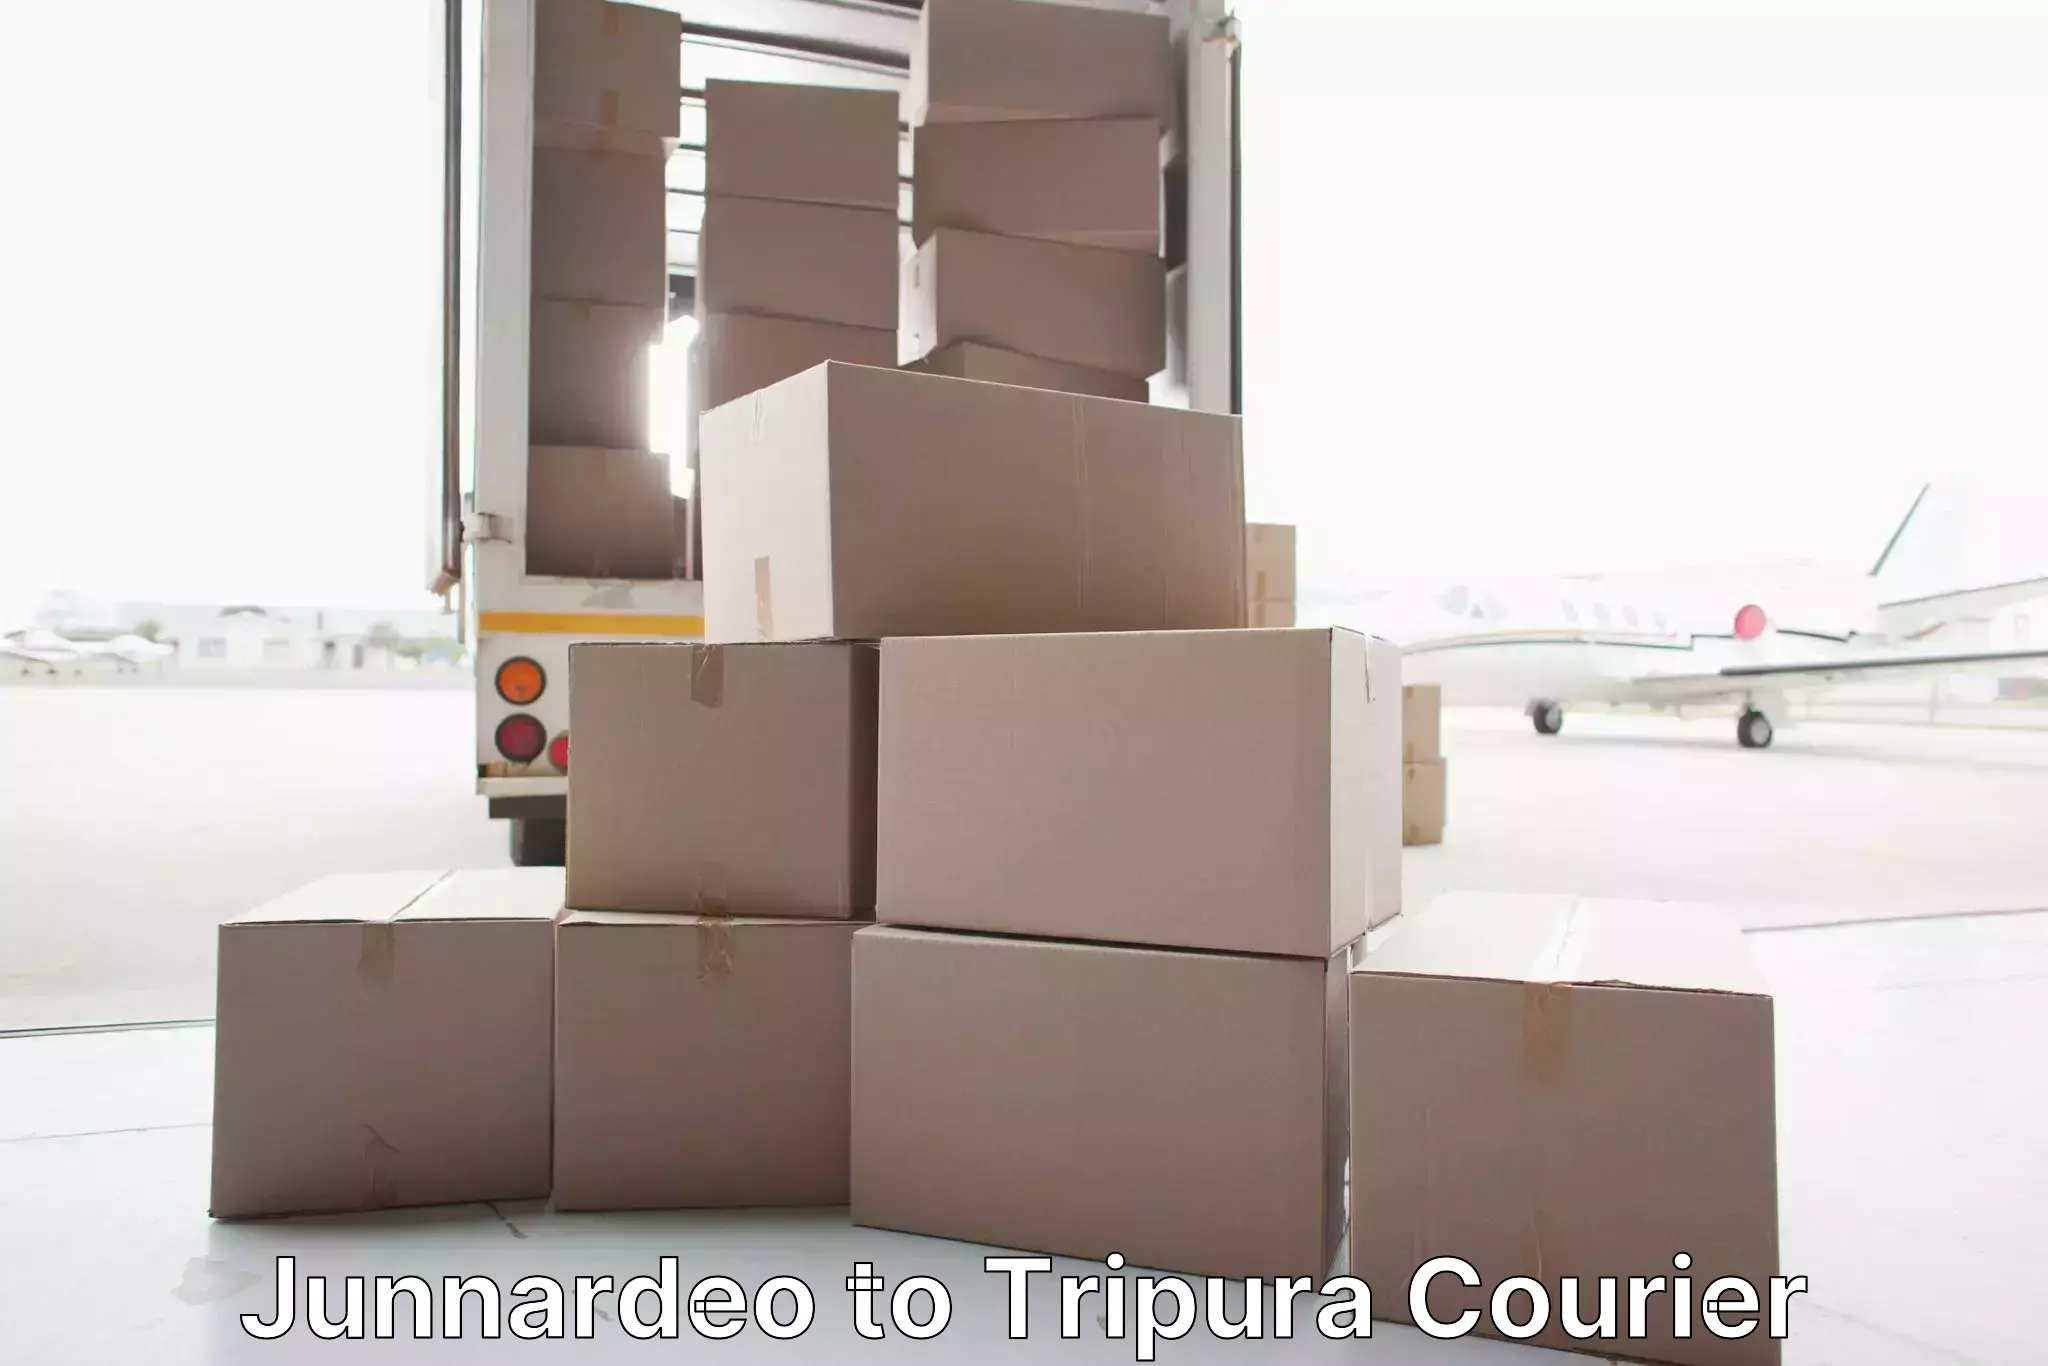 Household moving experts Junnardeo to Tripura